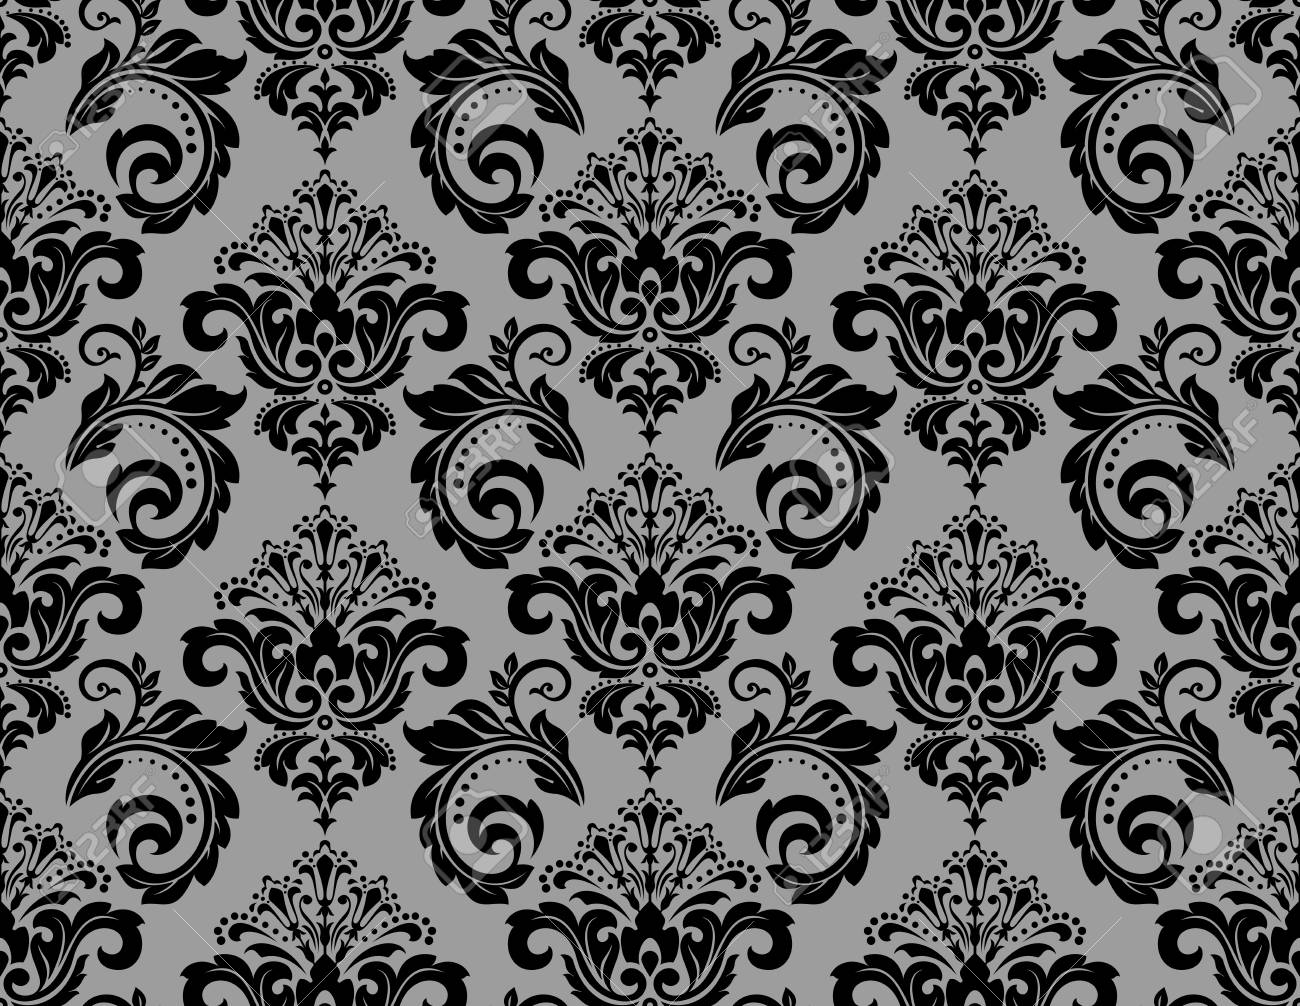 Floral Pattern Vintage Wallpaper In The Baroque Style Seamless